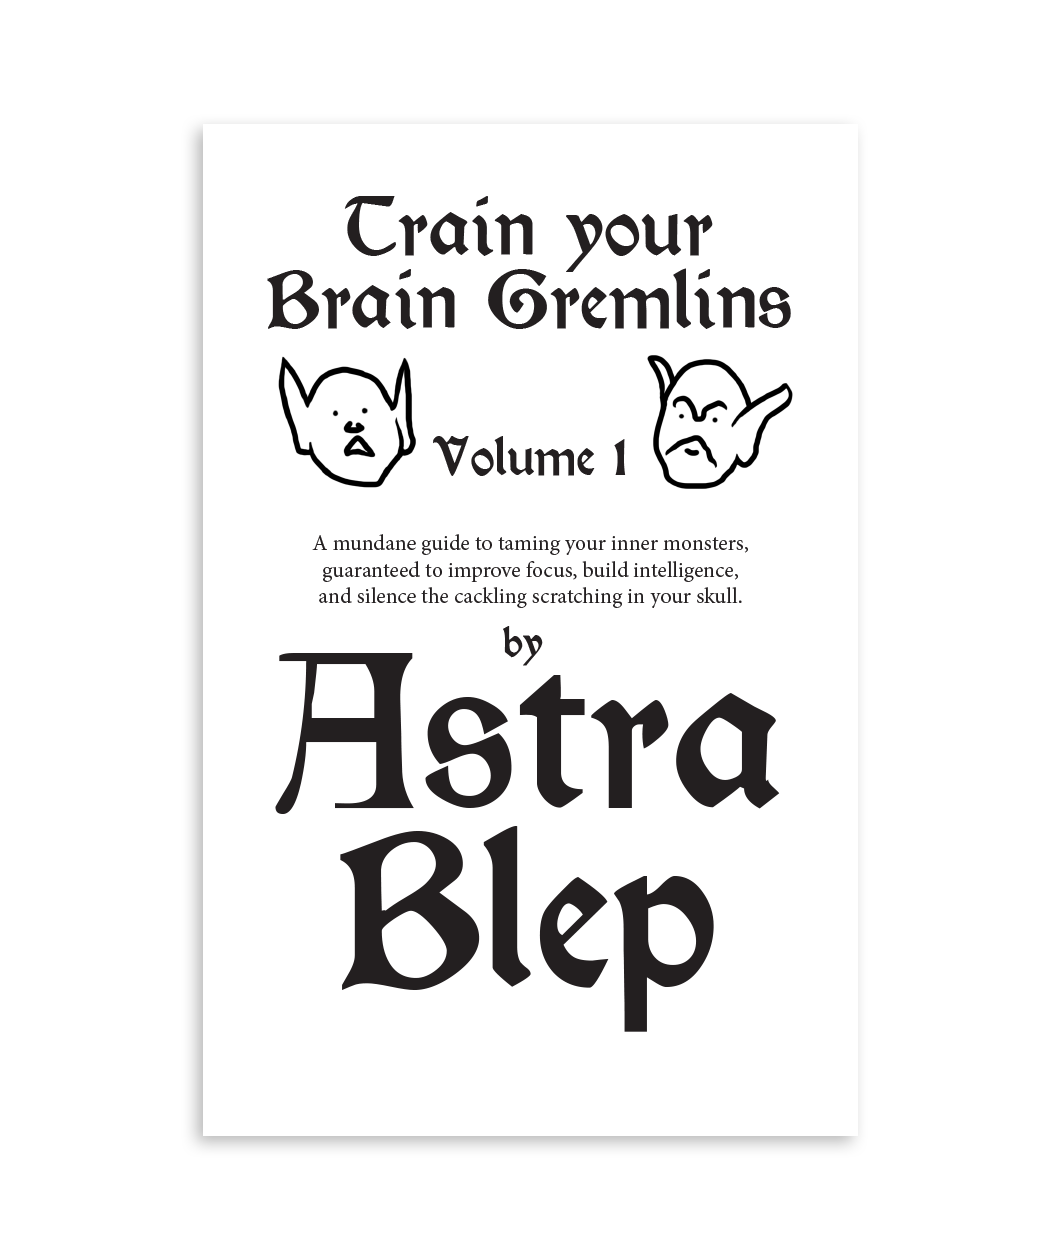 Cover art for zine that says, "Train your Brain Gremlins - Volume 1 - A mundane guide to taming your inner monsters, guaranteed to improve focus, build intelligence, and silence the cackling scratching in your skull. by Astra Blep"